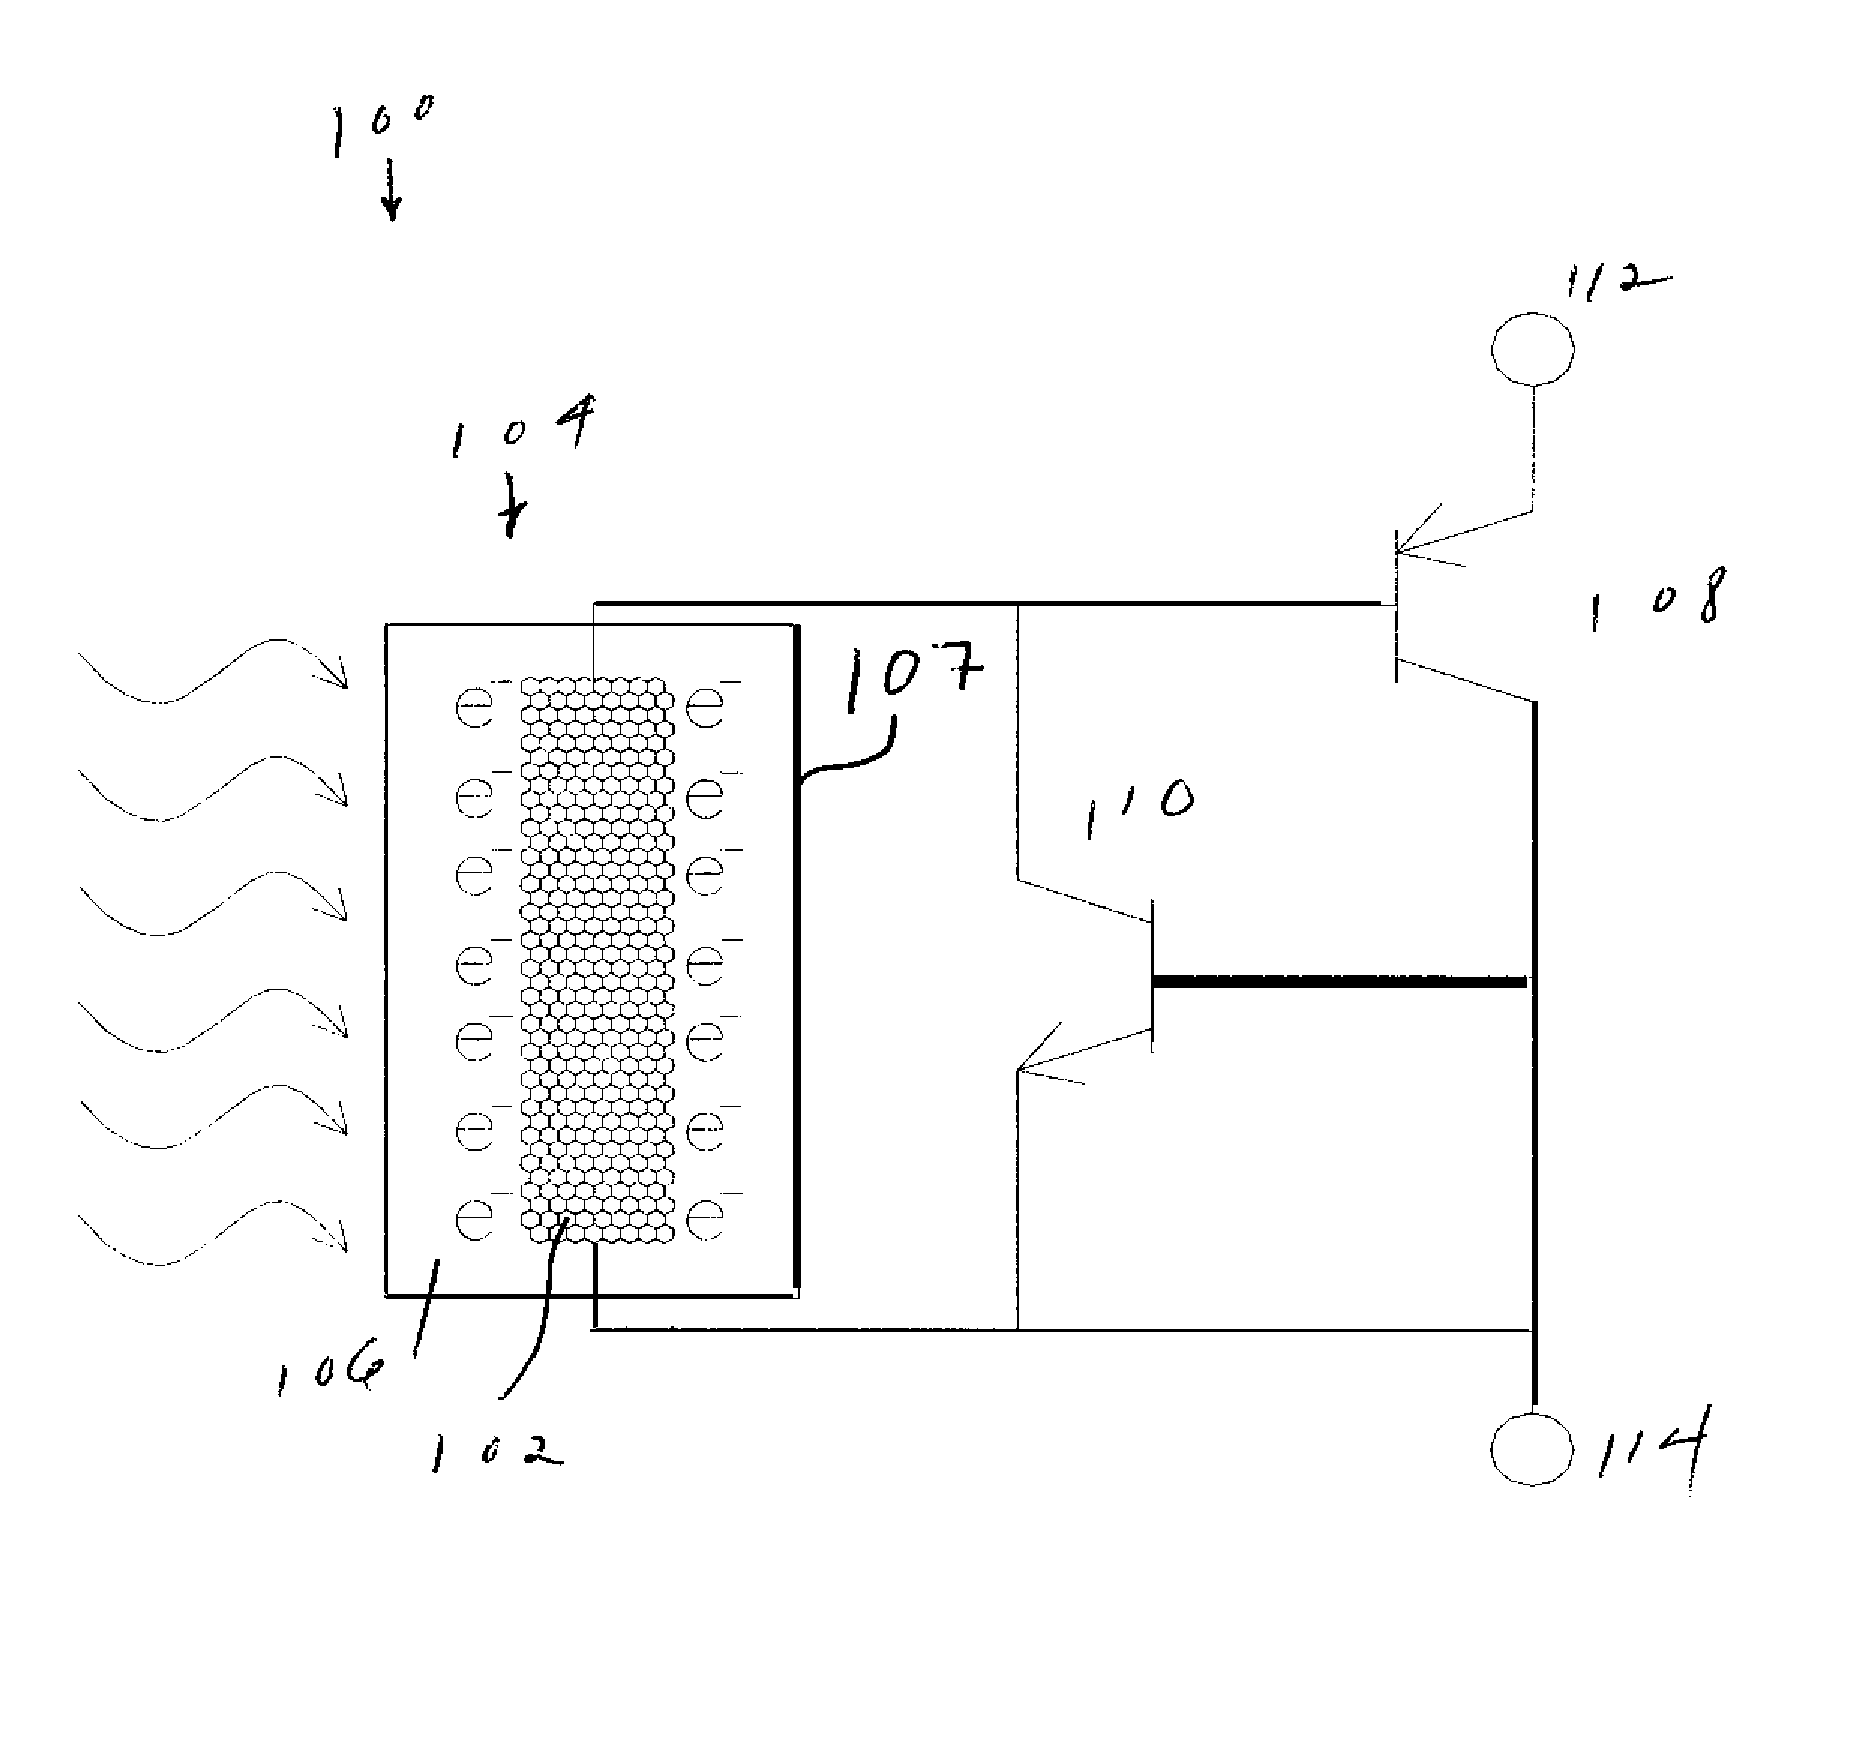 Optically controlled electrical switching device based on wide bandgap semiconductors